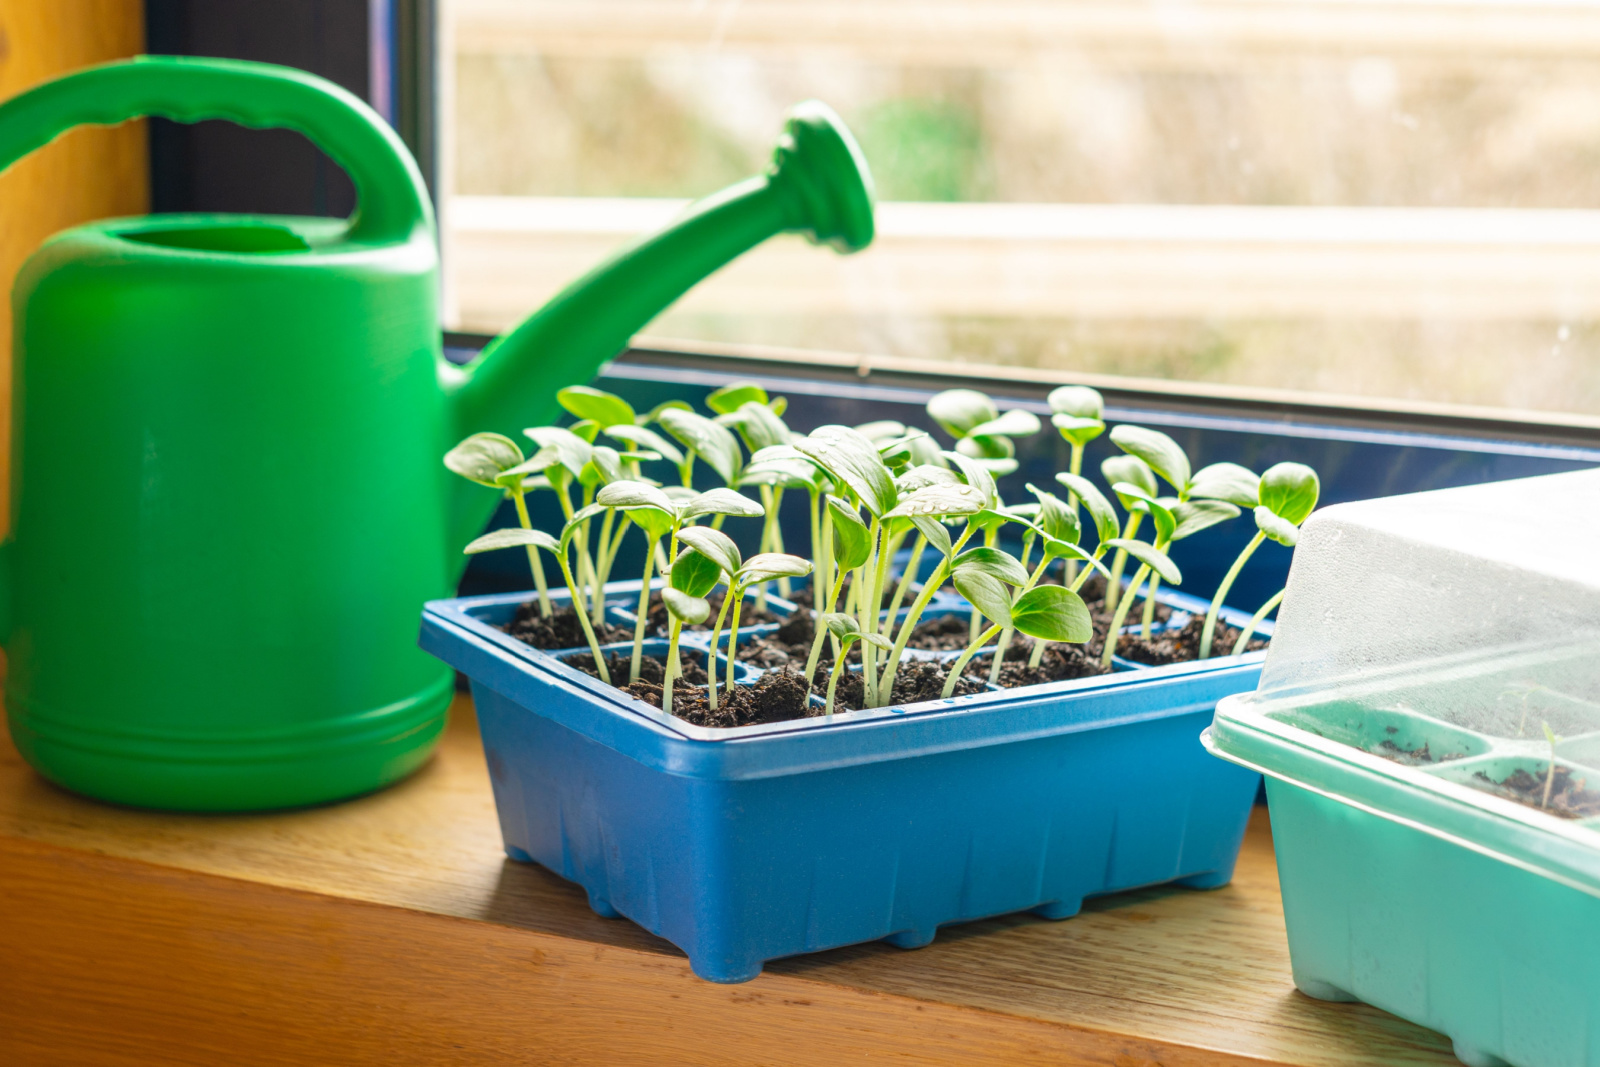 Cucumber sprouts in a container and green watering can on the windowsill